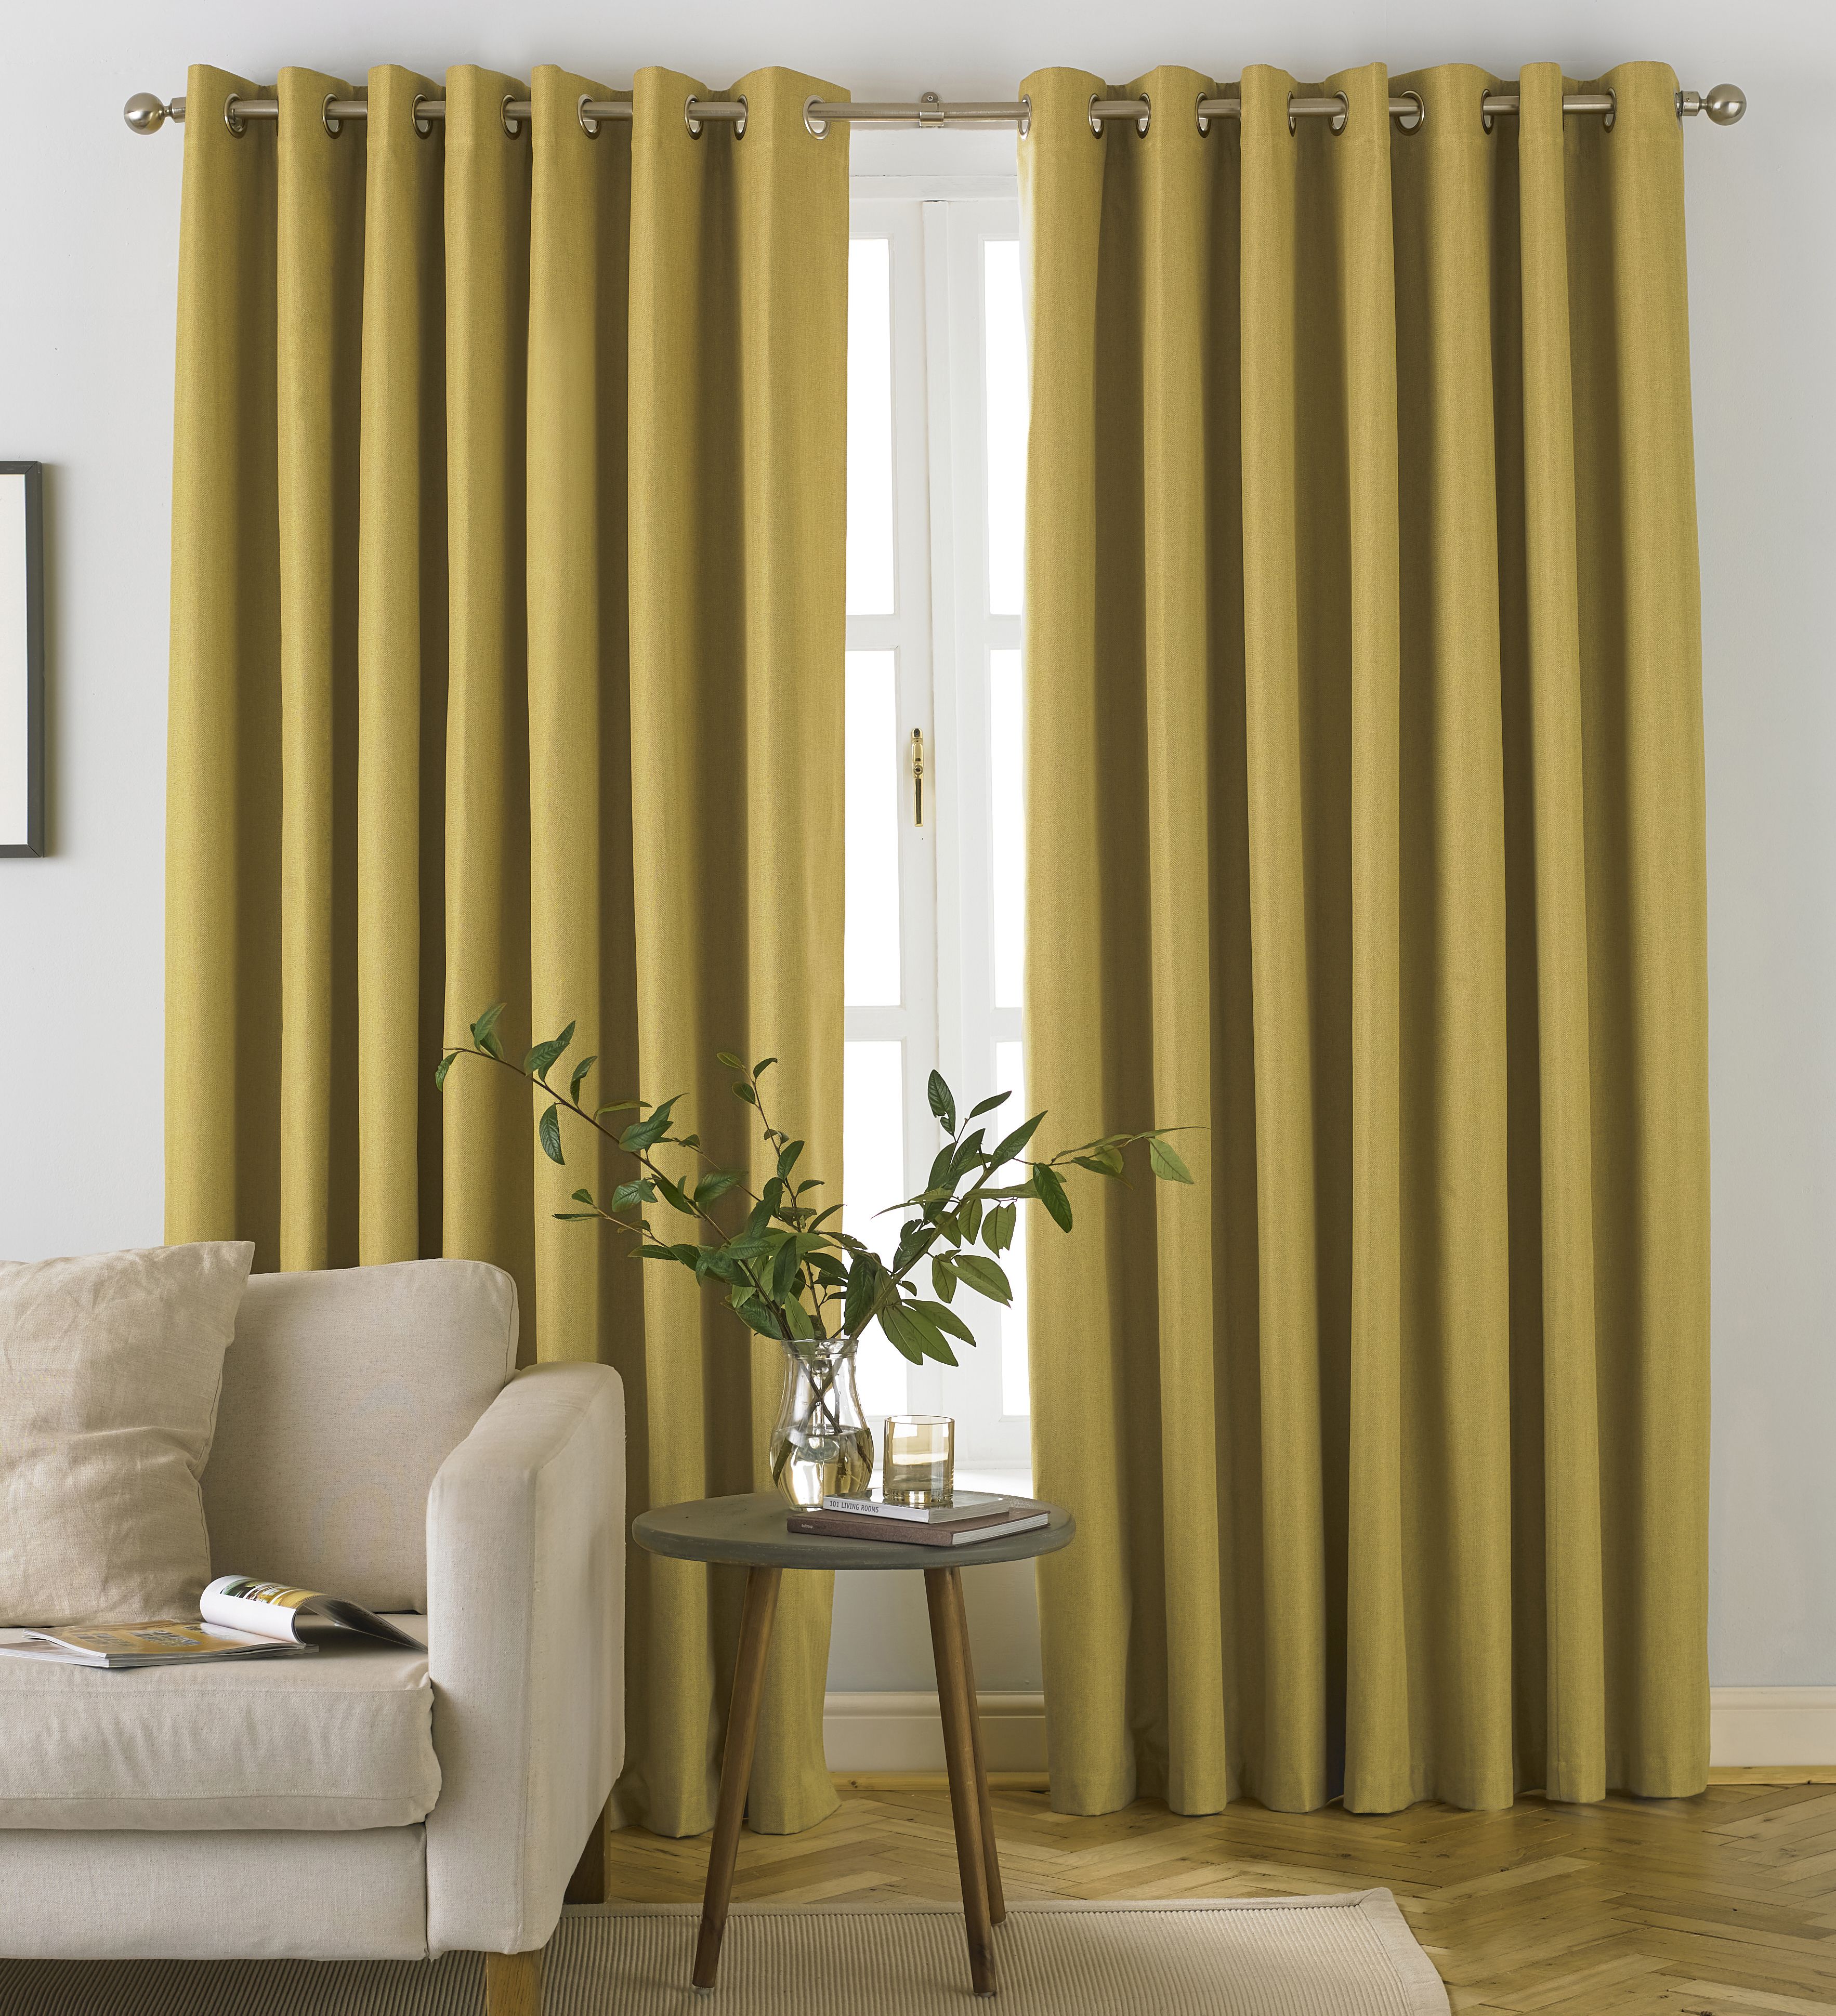 Whether you prefer a bright and cheery room or a more natural atmosphere the Moon curtains have a shade for you. These effective blackout curtains have a 3-pass blackout lining to ensure you have the best sleep of your life. This design of  curtain is an energy efficient choice as they are temperature controlled making your room cool in summer and warm in winter. With stainless steel eyelet holes the Moon curtains are easy to hang and only require a curtain pole for installation.